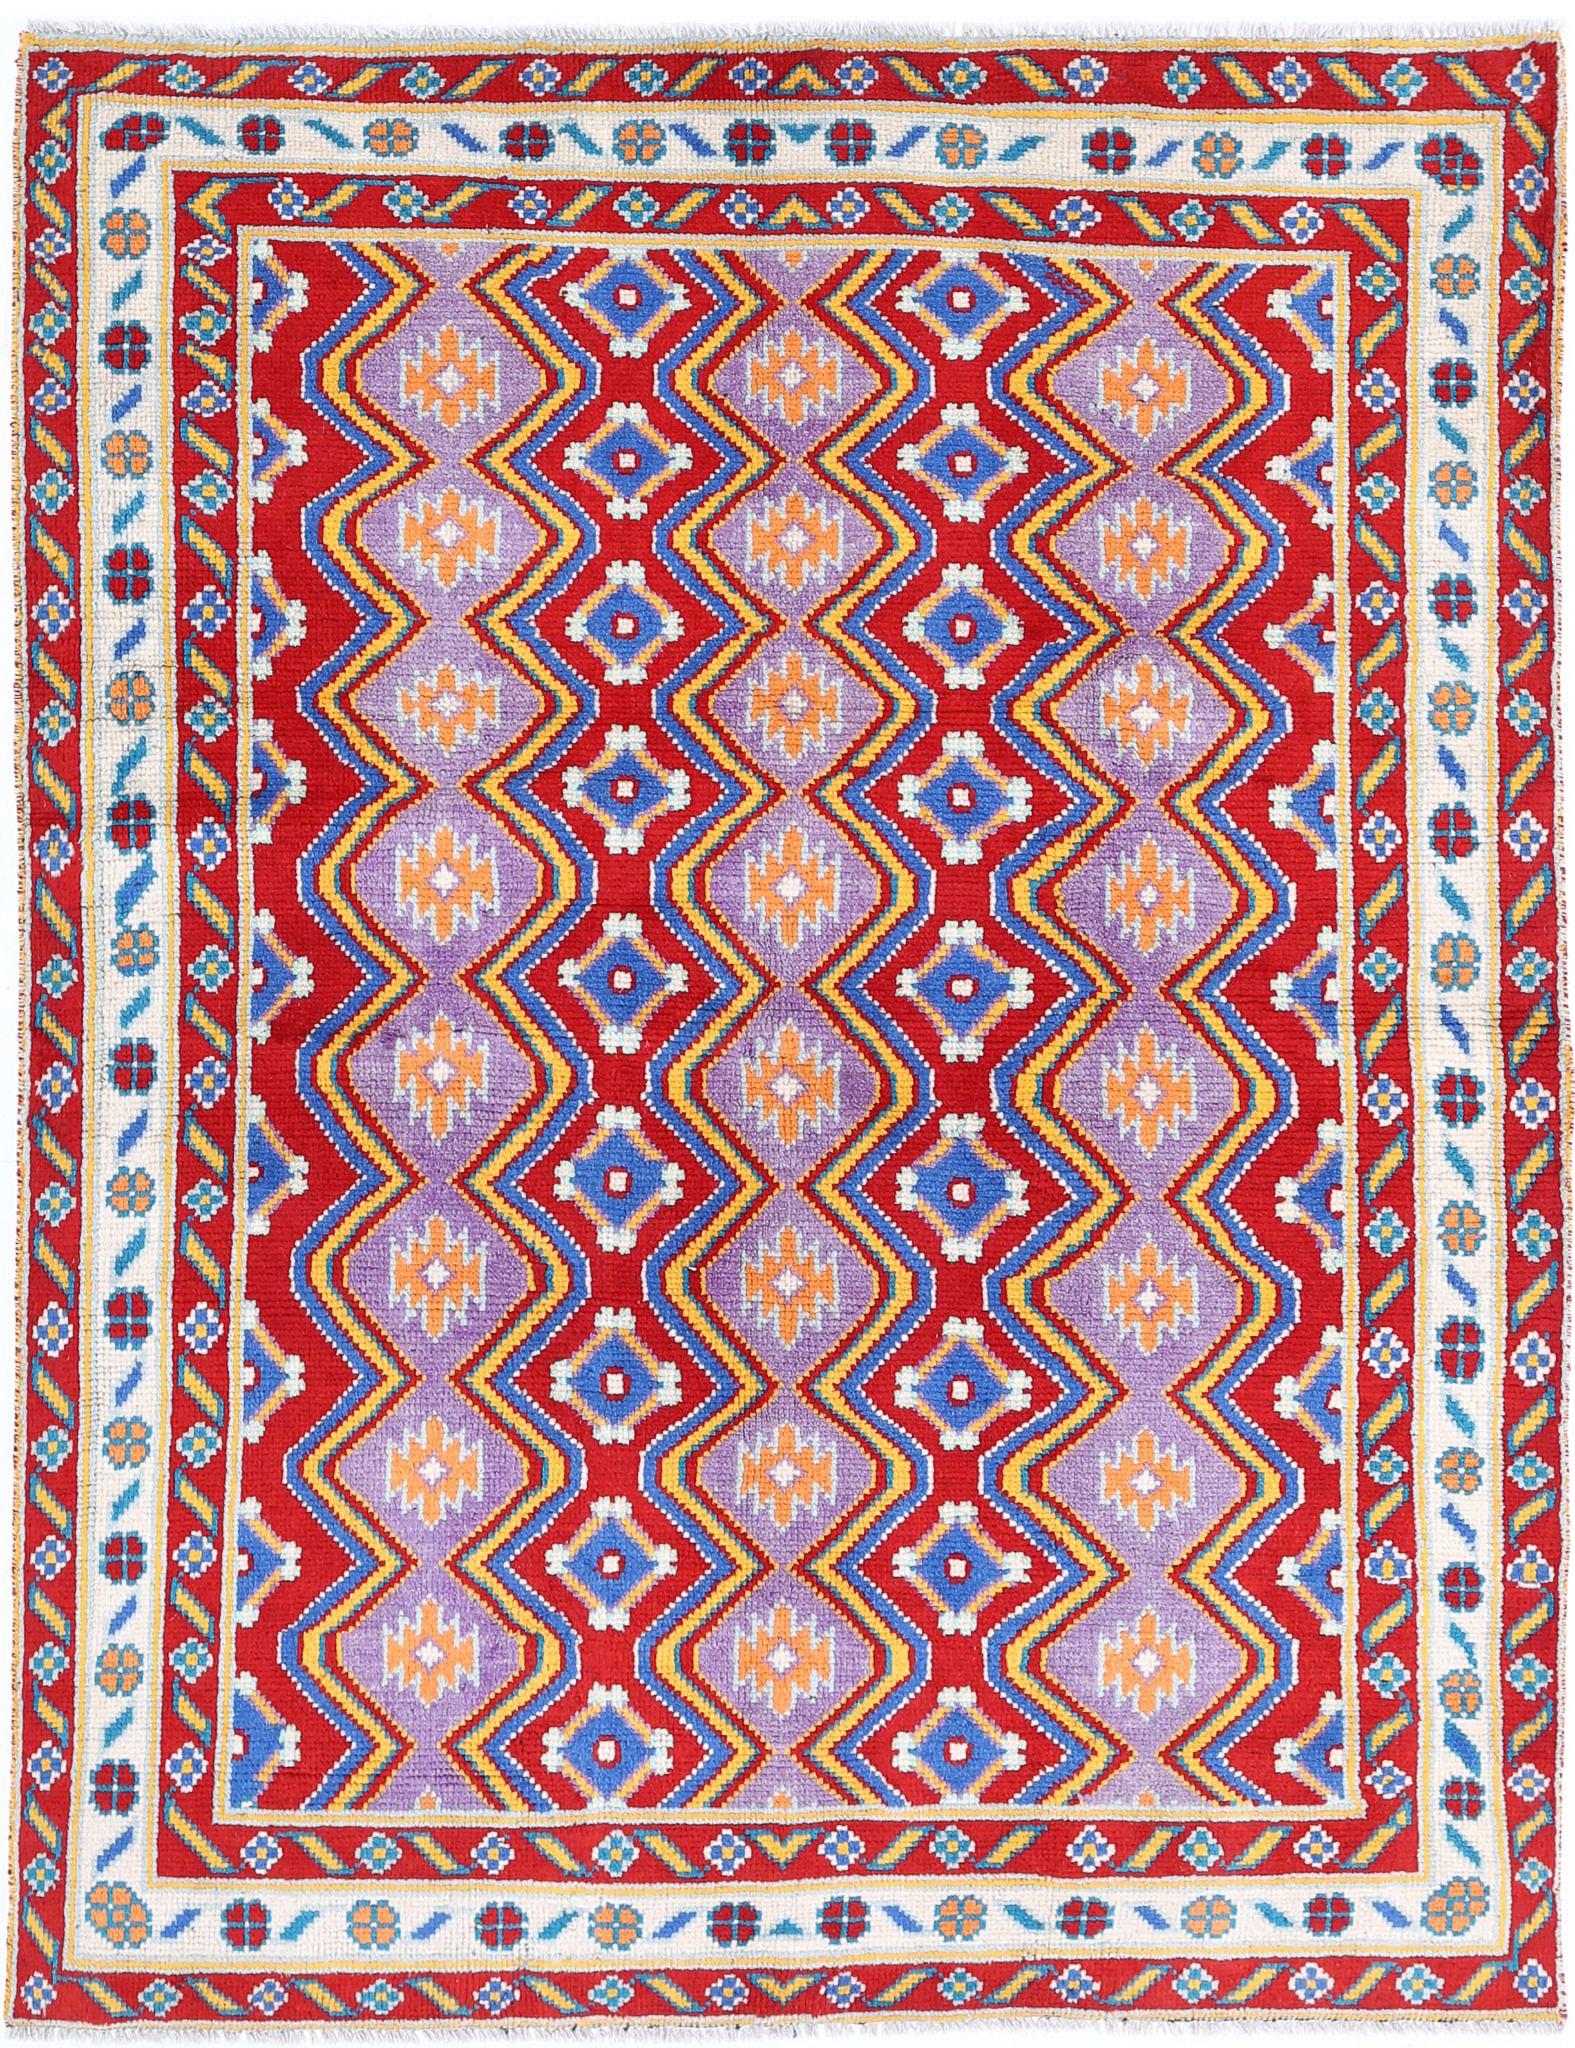 Revival-hand-knotted-qarghani-wool-rug-5014215.jpg